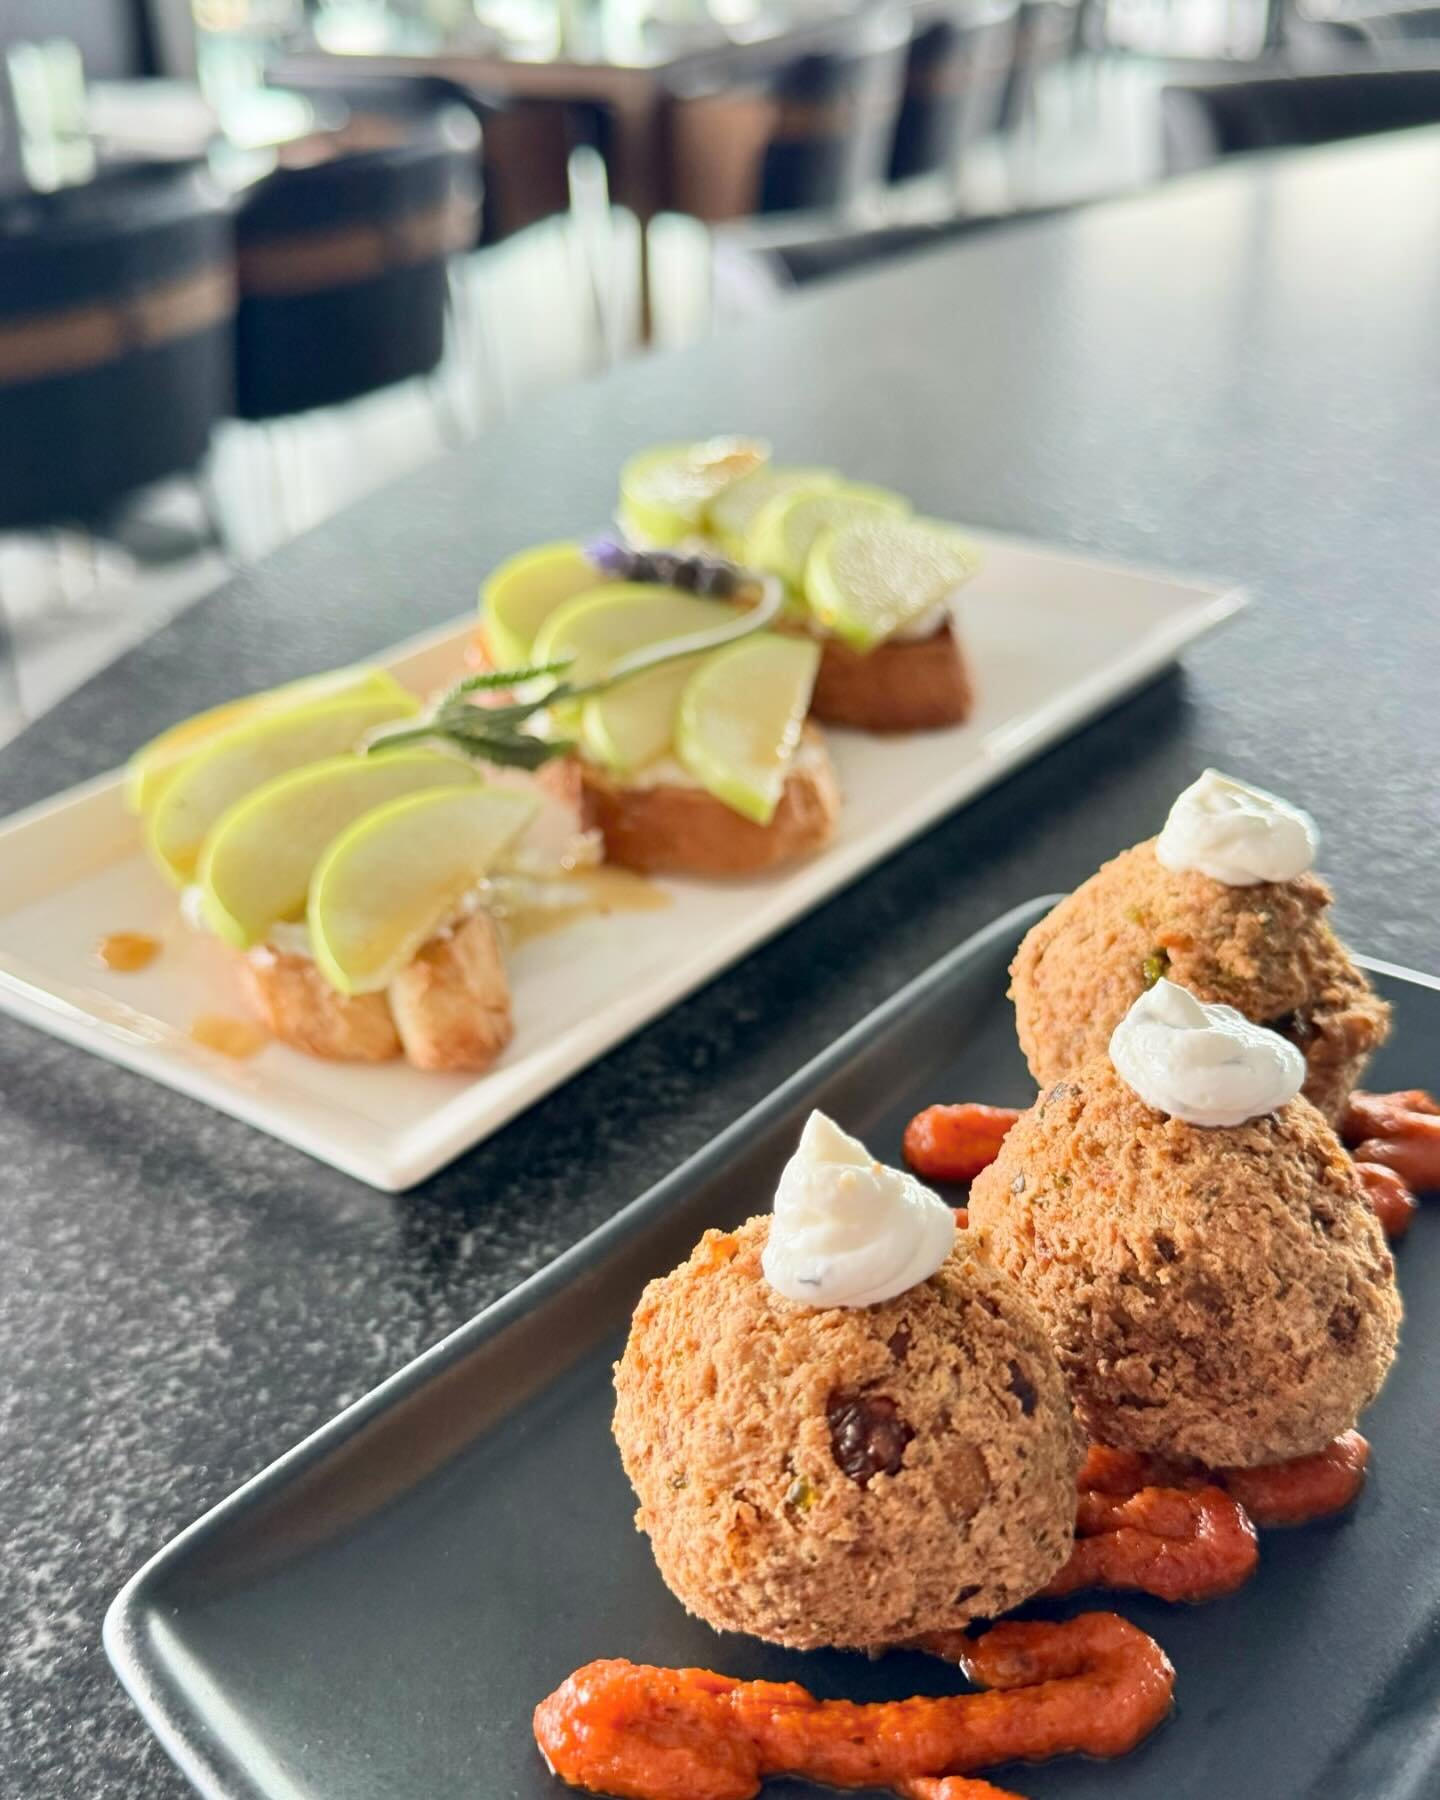 Start off Portsmouth Restaurant Week right with one of these delicious First Course offerings:

Falafel Mazze - Falafel, Roasted Tomato &amp; Harissa Pur&eacute;e, Mint Yogurt 🧆

Cheese &amp; Crostini - French Bread, Lavender Goat Cheese, Granny Smi